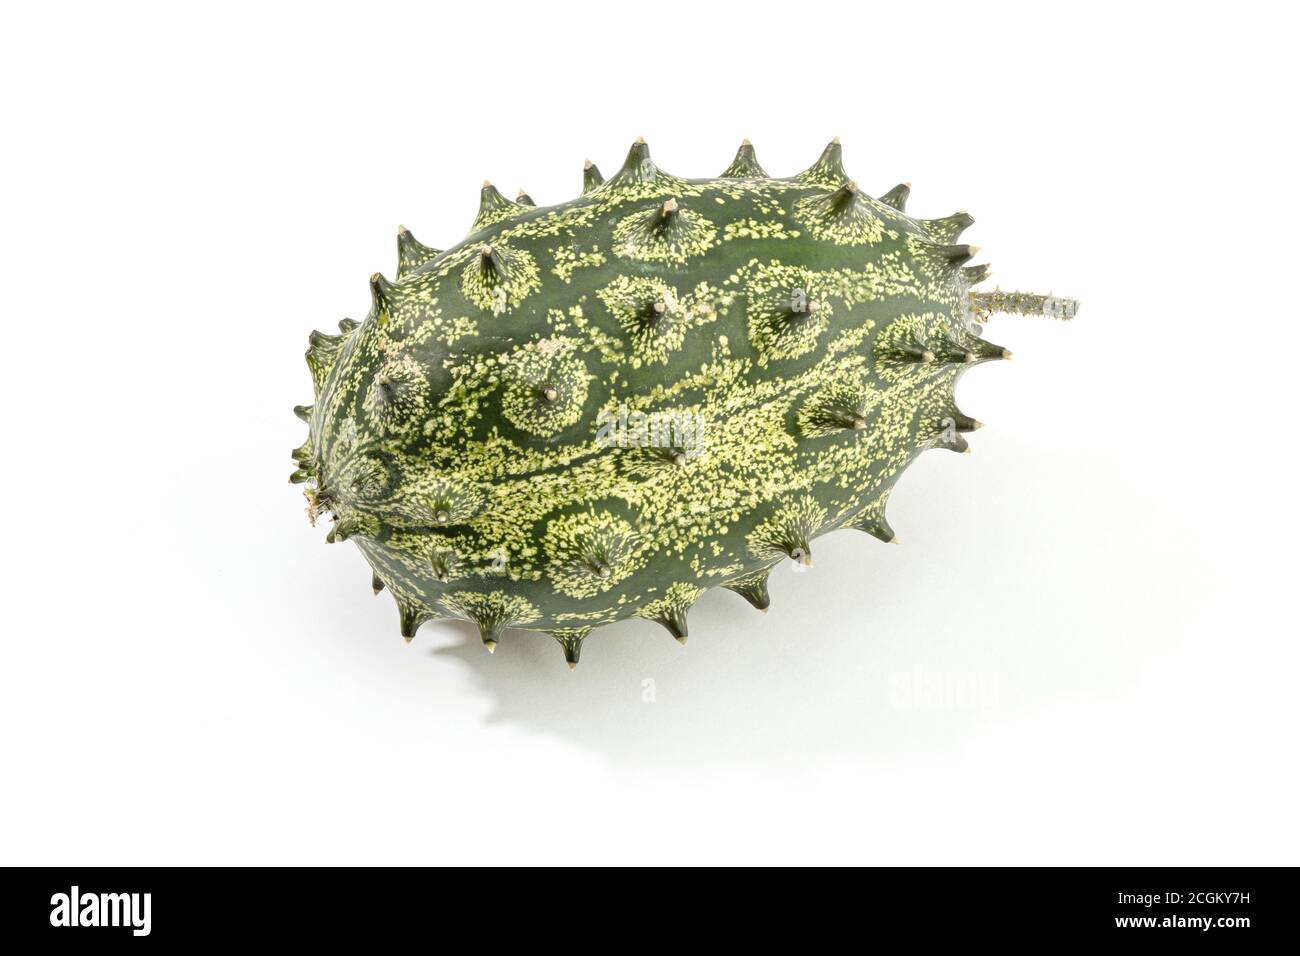 Kiwano fruit, spiked melon or jelly melon isolated on white background. Cucumis metuliferus Stock Photo